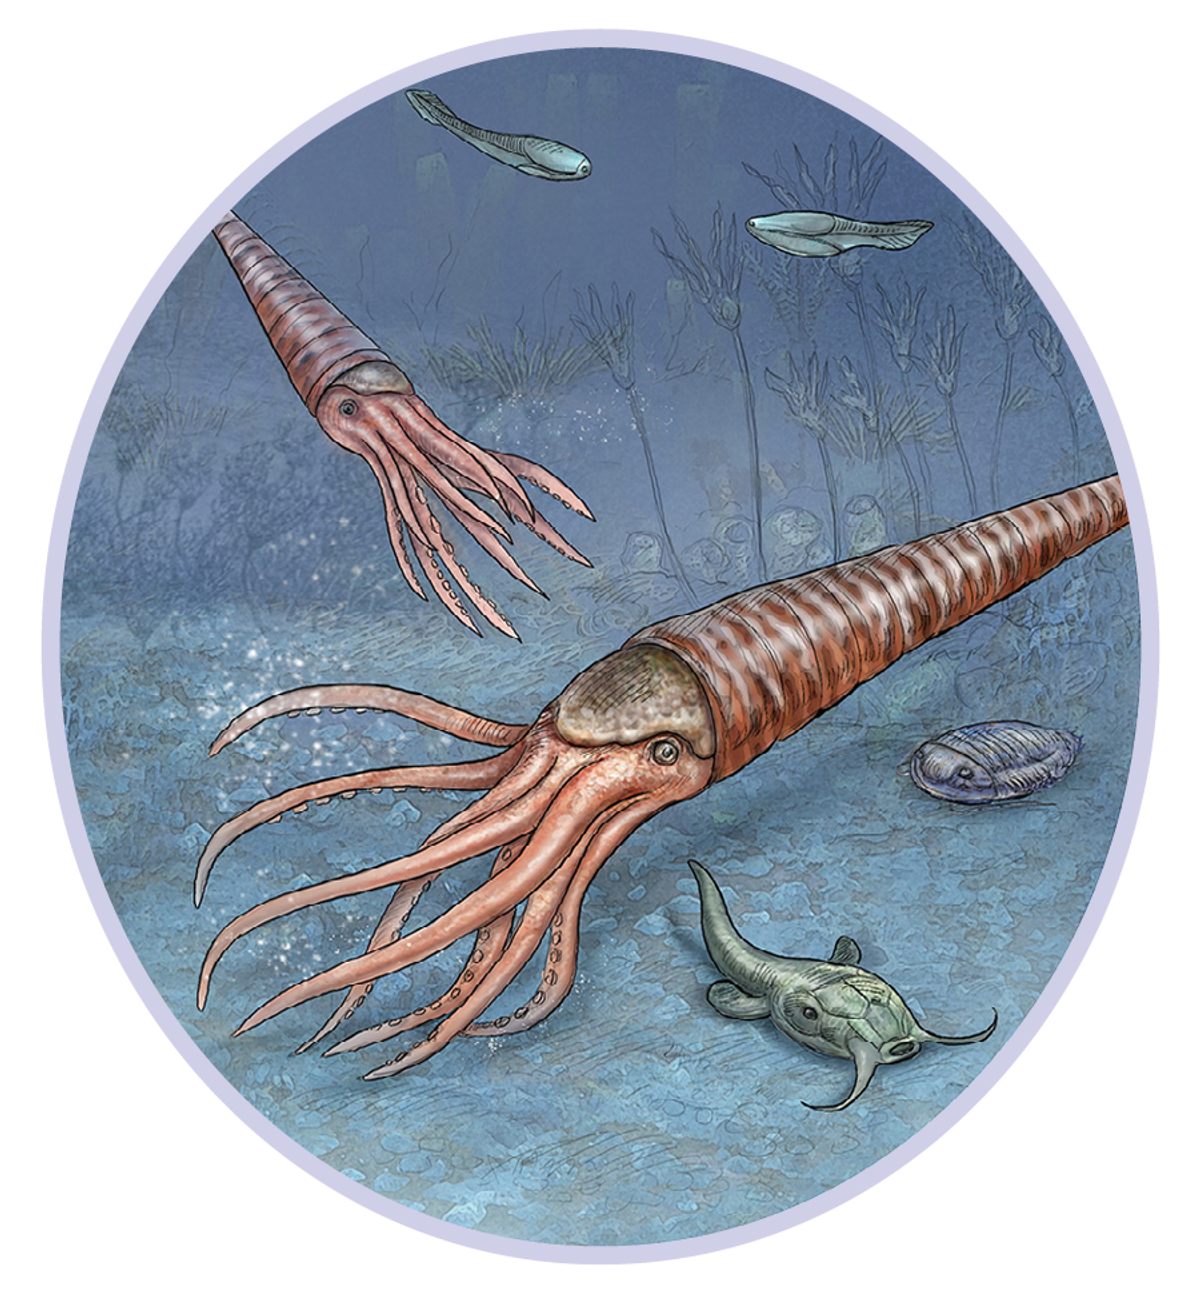 Illustration of extinct creatures from the Ordovician-Silurian period